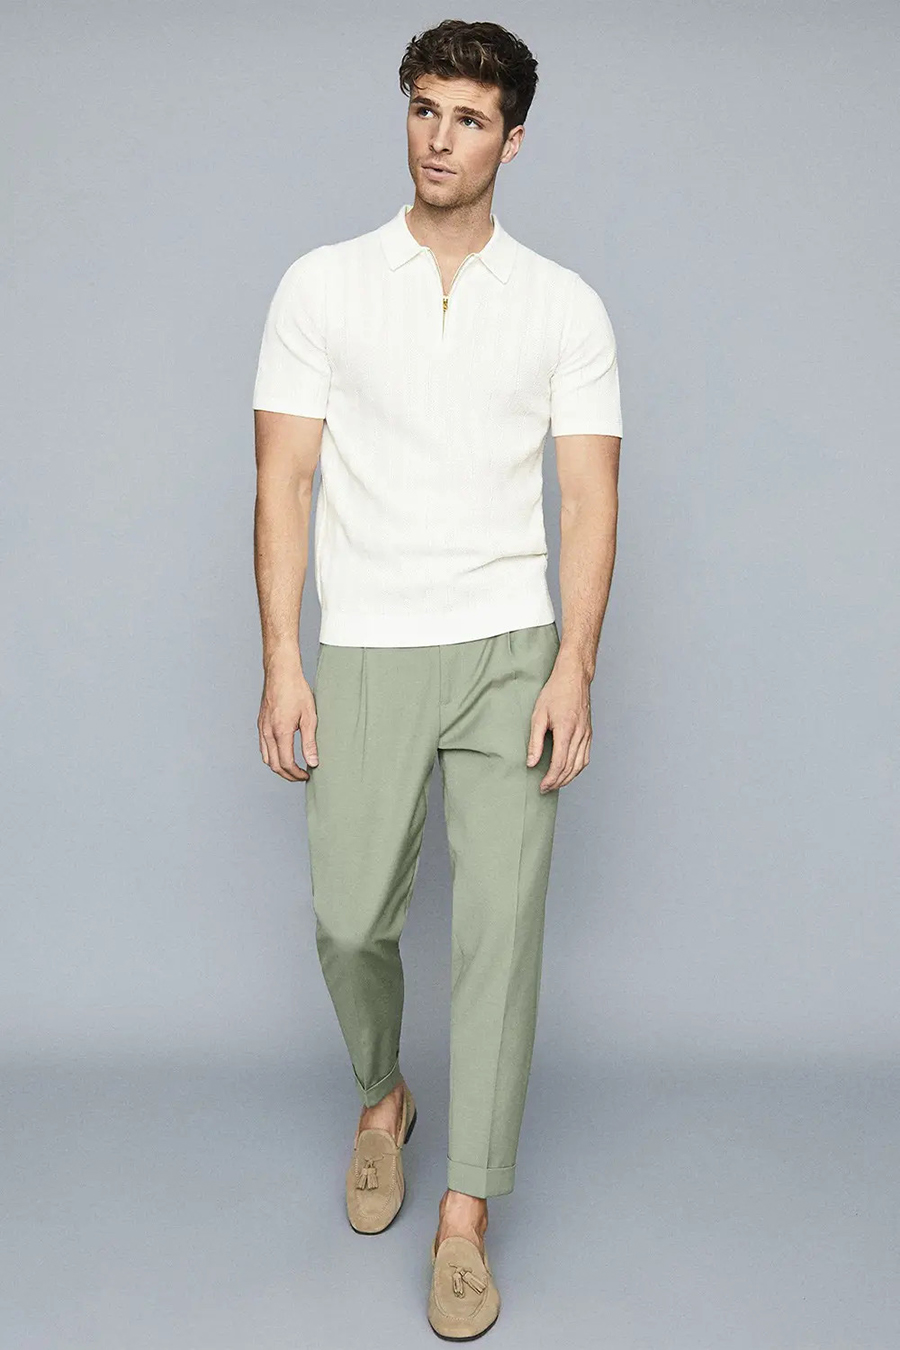 White polo shirt, green dress pants, and tan loafers outfit